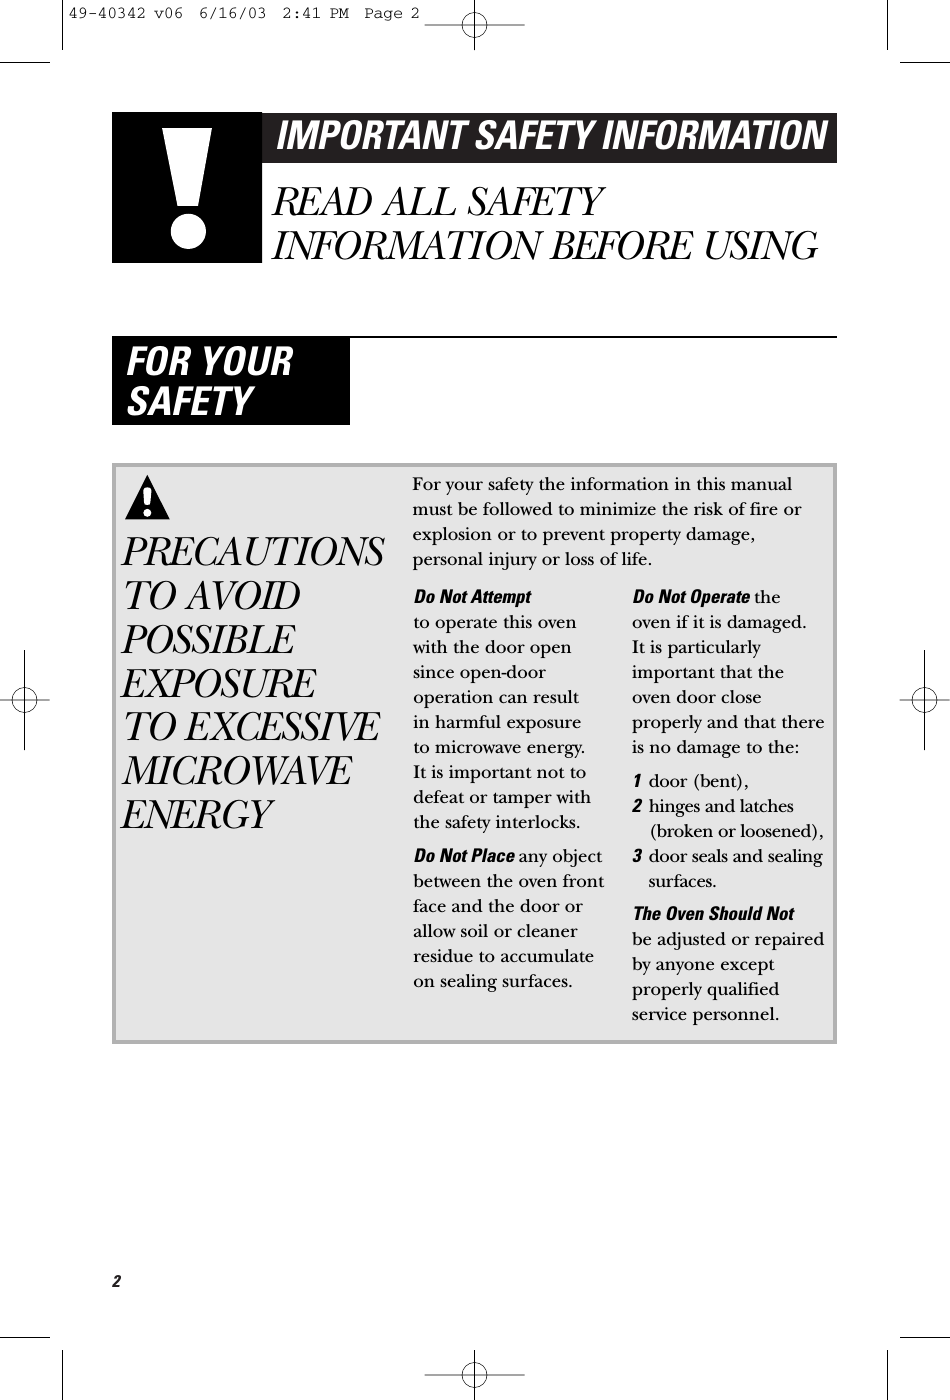 2IMPORTANT SAFETY INFORMATIONREAD ALL SAFETYINFORMATION BEFORE USINGFOR YOURSAFETYPRECAUTIONSTO AVOIDPOSSIBLEEXPOSURE TO EXCESSIVEMICROWAVEENERGYFor your safety the information in this manualmust be followed to minimize the risk of fire orexplosion or to prevent property damage,personal injury or loss of life.Do Not Attempt to operate this ovenwith the door opensince open-dooroperation can result in harmful exposure to microwave energy. It is important not todefeat or tamper withthe safety interlocks.Do Not Place any objectbetween the oven frontface and the door orallow soil or cleanerresidue to accumulateon sealing surfaces.Do Not Operate the oven if it is damaged. It is particularlyimportant that theoven door closeproperly and that thereis no damage to the:1door (bent), 2hinges and latches(broken or loosened),3door seals and sealingsurfaces.The Oven Should Not be adjusted or repairedby anyone exceptproperly qualifiedservice personnel.49-40342 v06  6/16/03  2:41 PM  Page 2